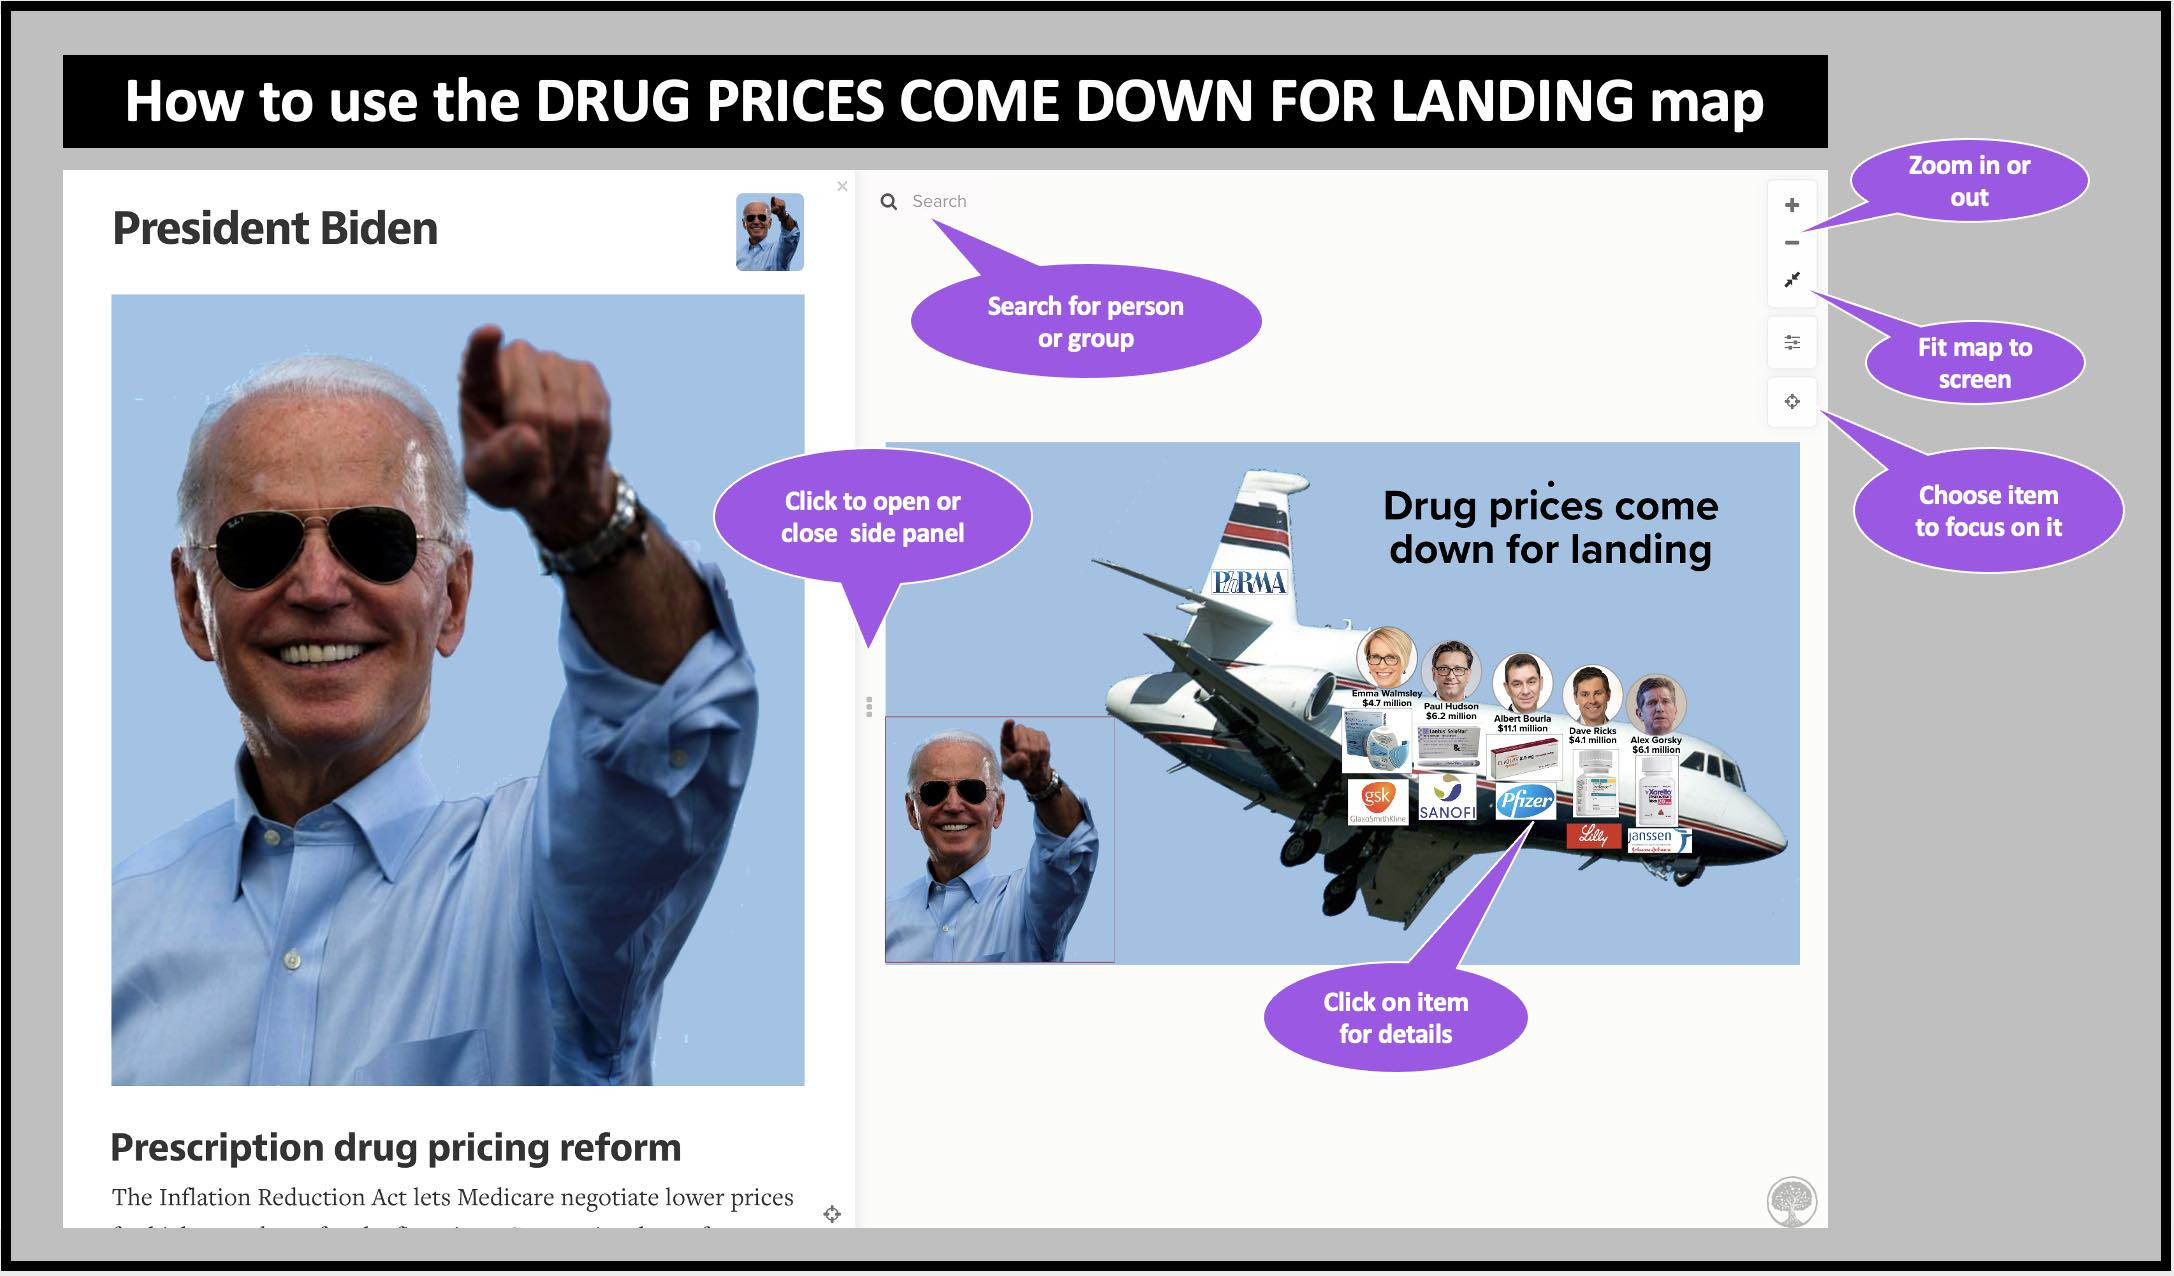 How to use the Drug Prices Come Down For Landing map